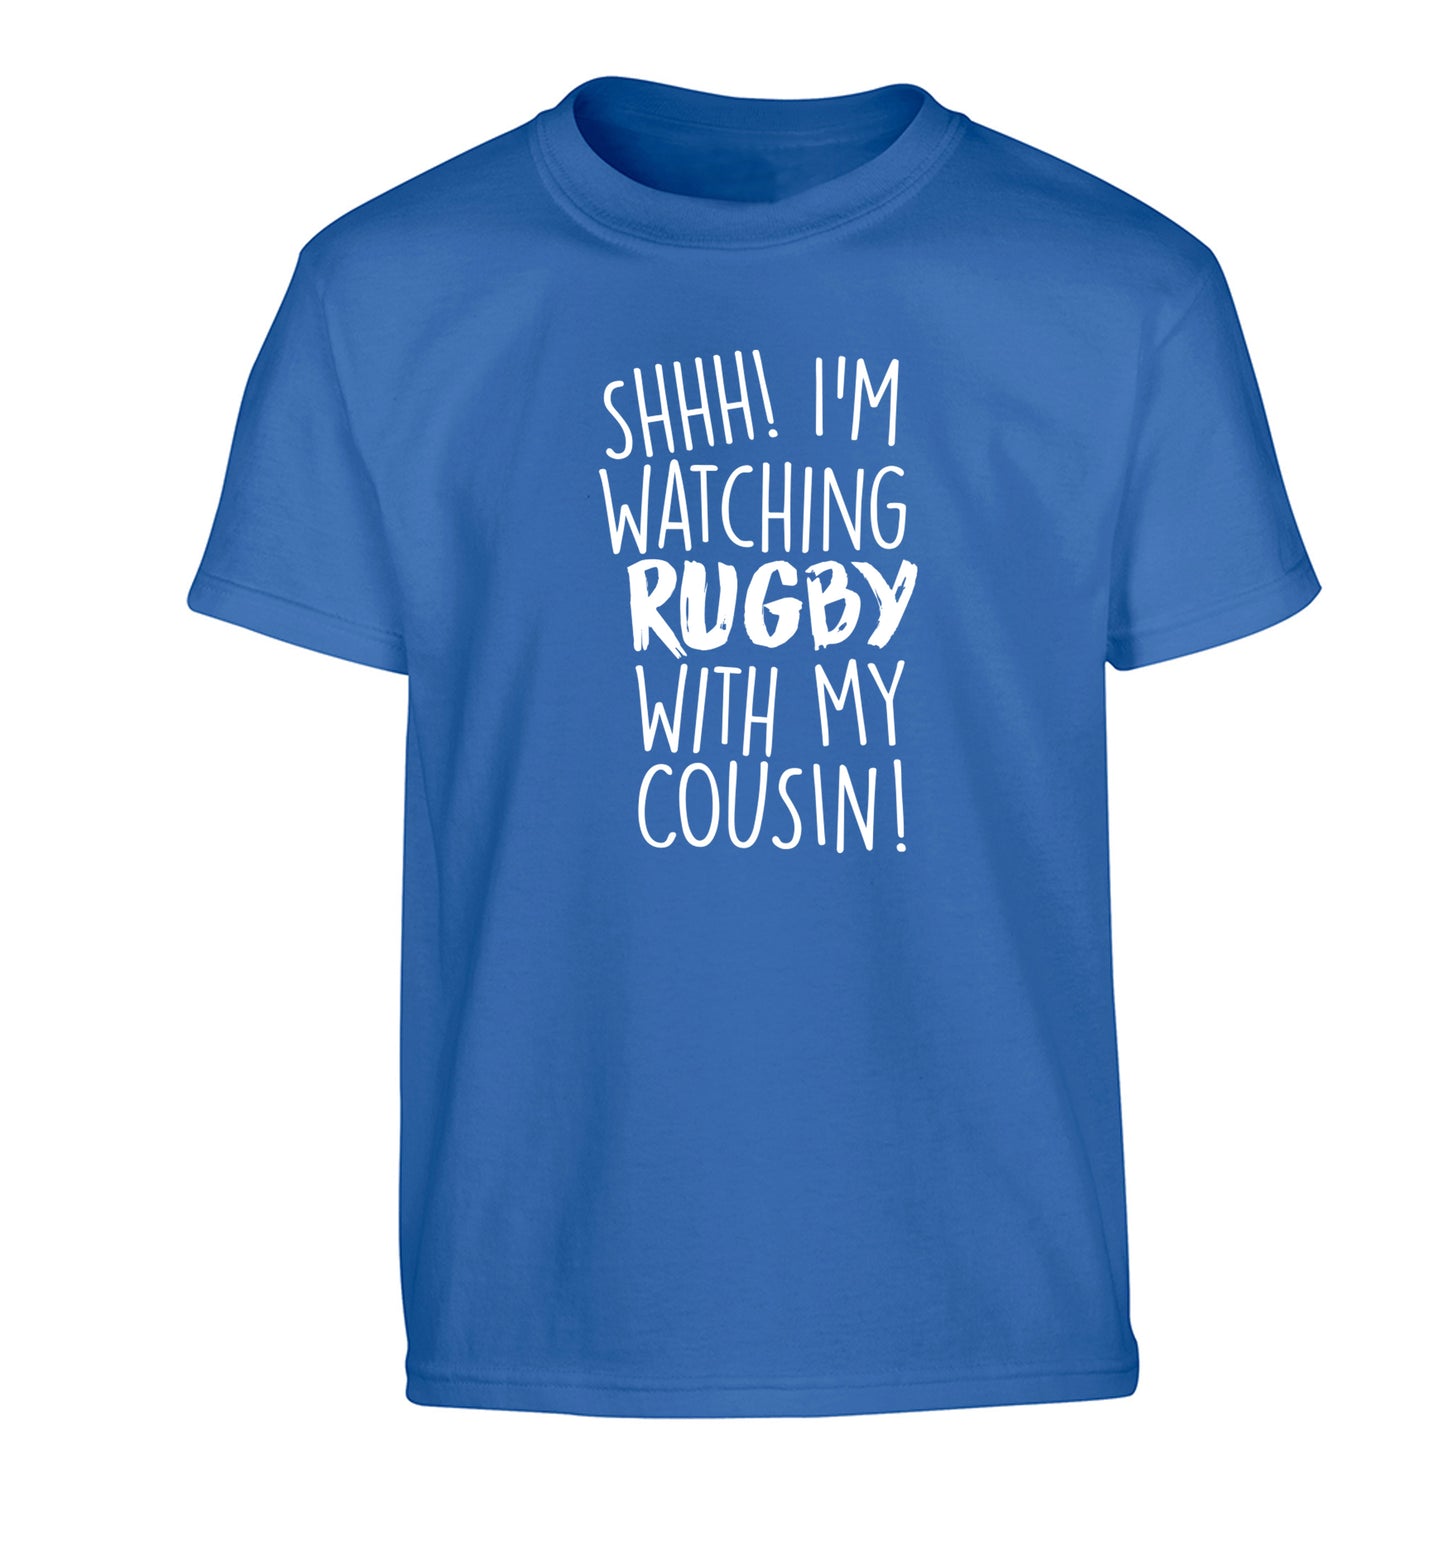 Shhh I'm watching rugby with my cousin Children's blue Tshirt 12-13 Years